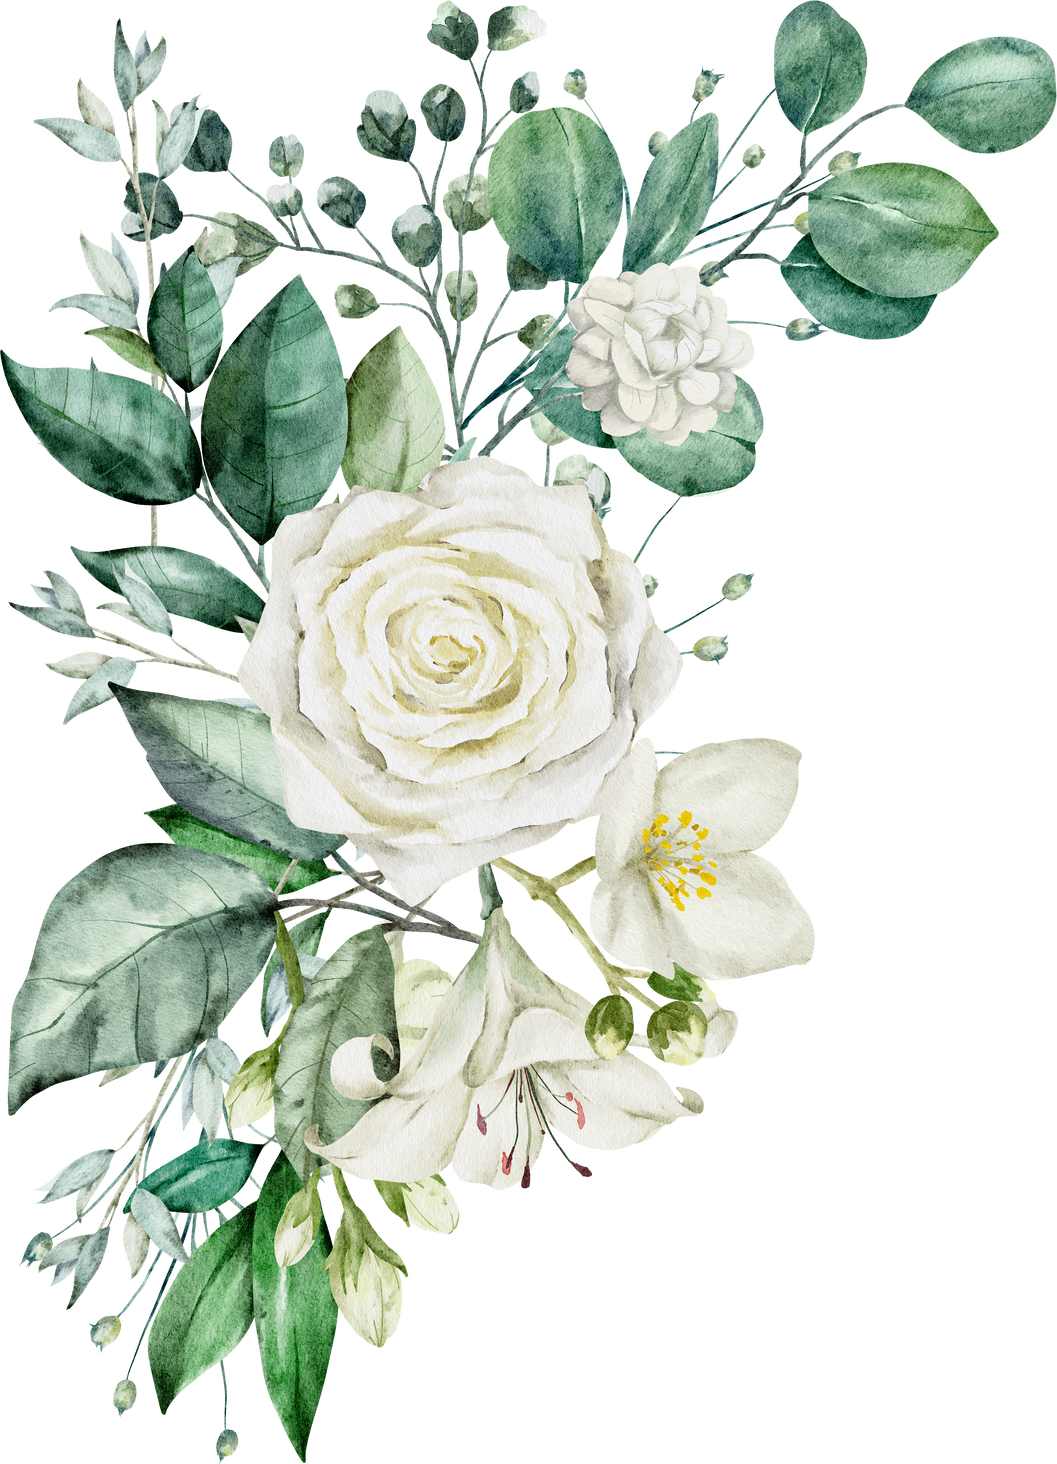 Green leaves and white rose watercolor